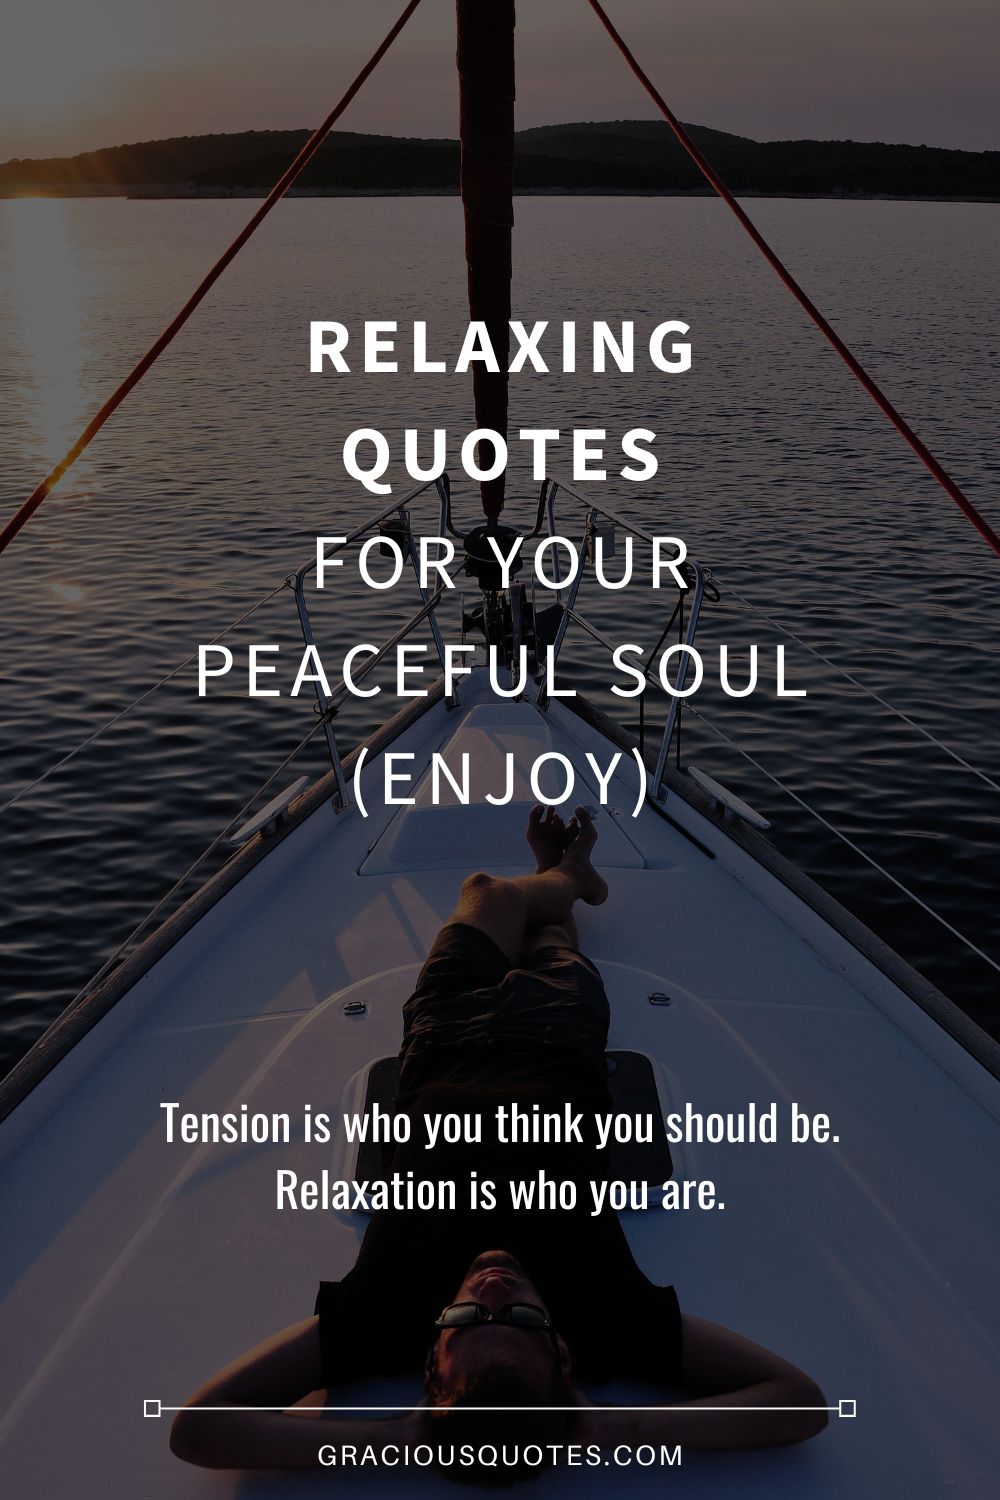 Relaxing Quotes for Your Peaceful Soul (ENJOY) - Gracious Quotes